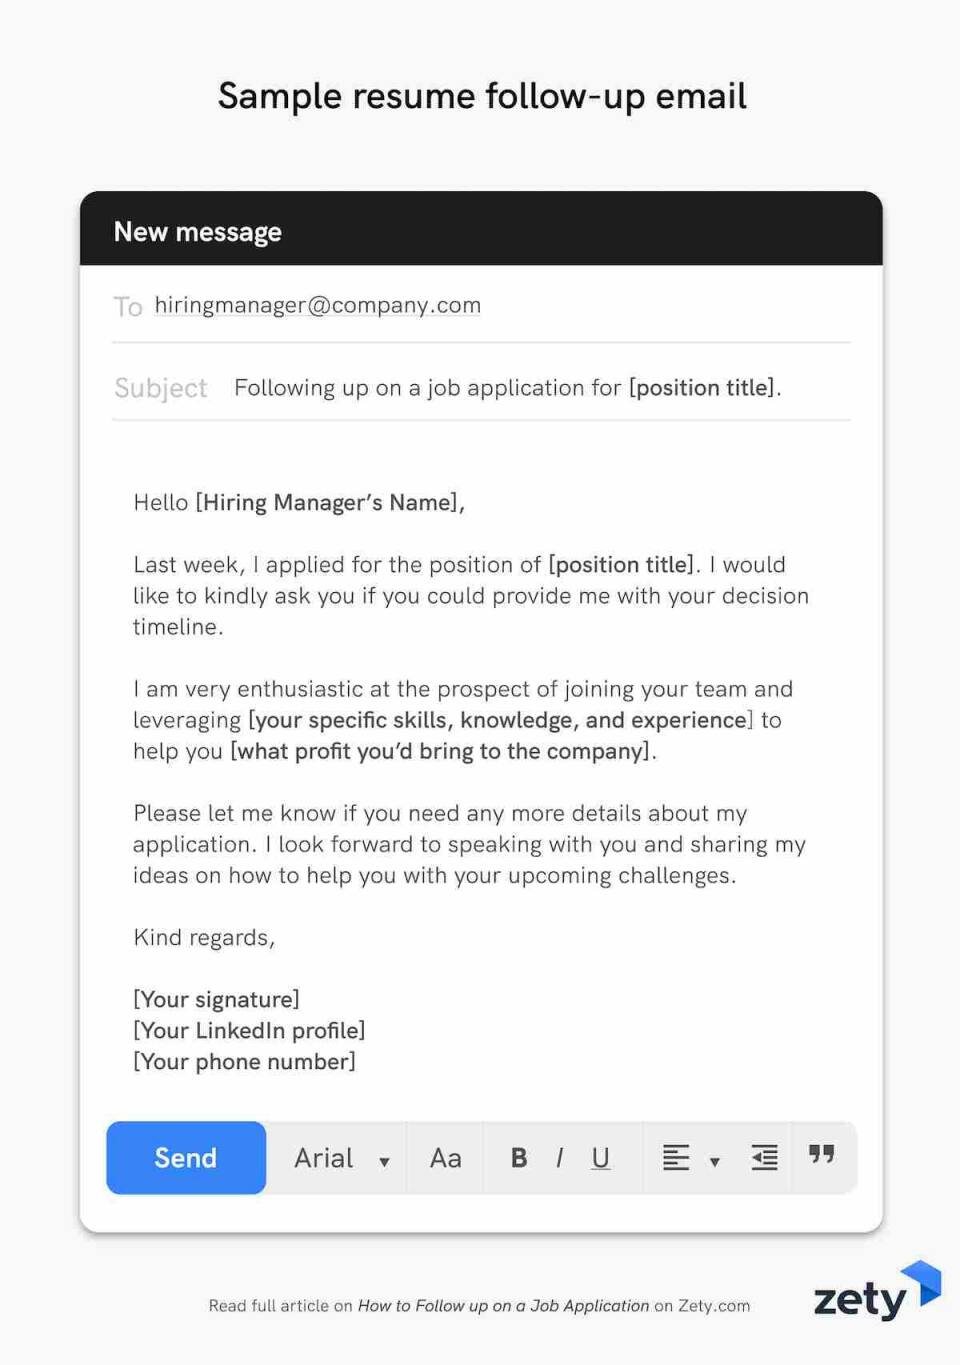 How To Follow Up On A Job Application With Email Samples